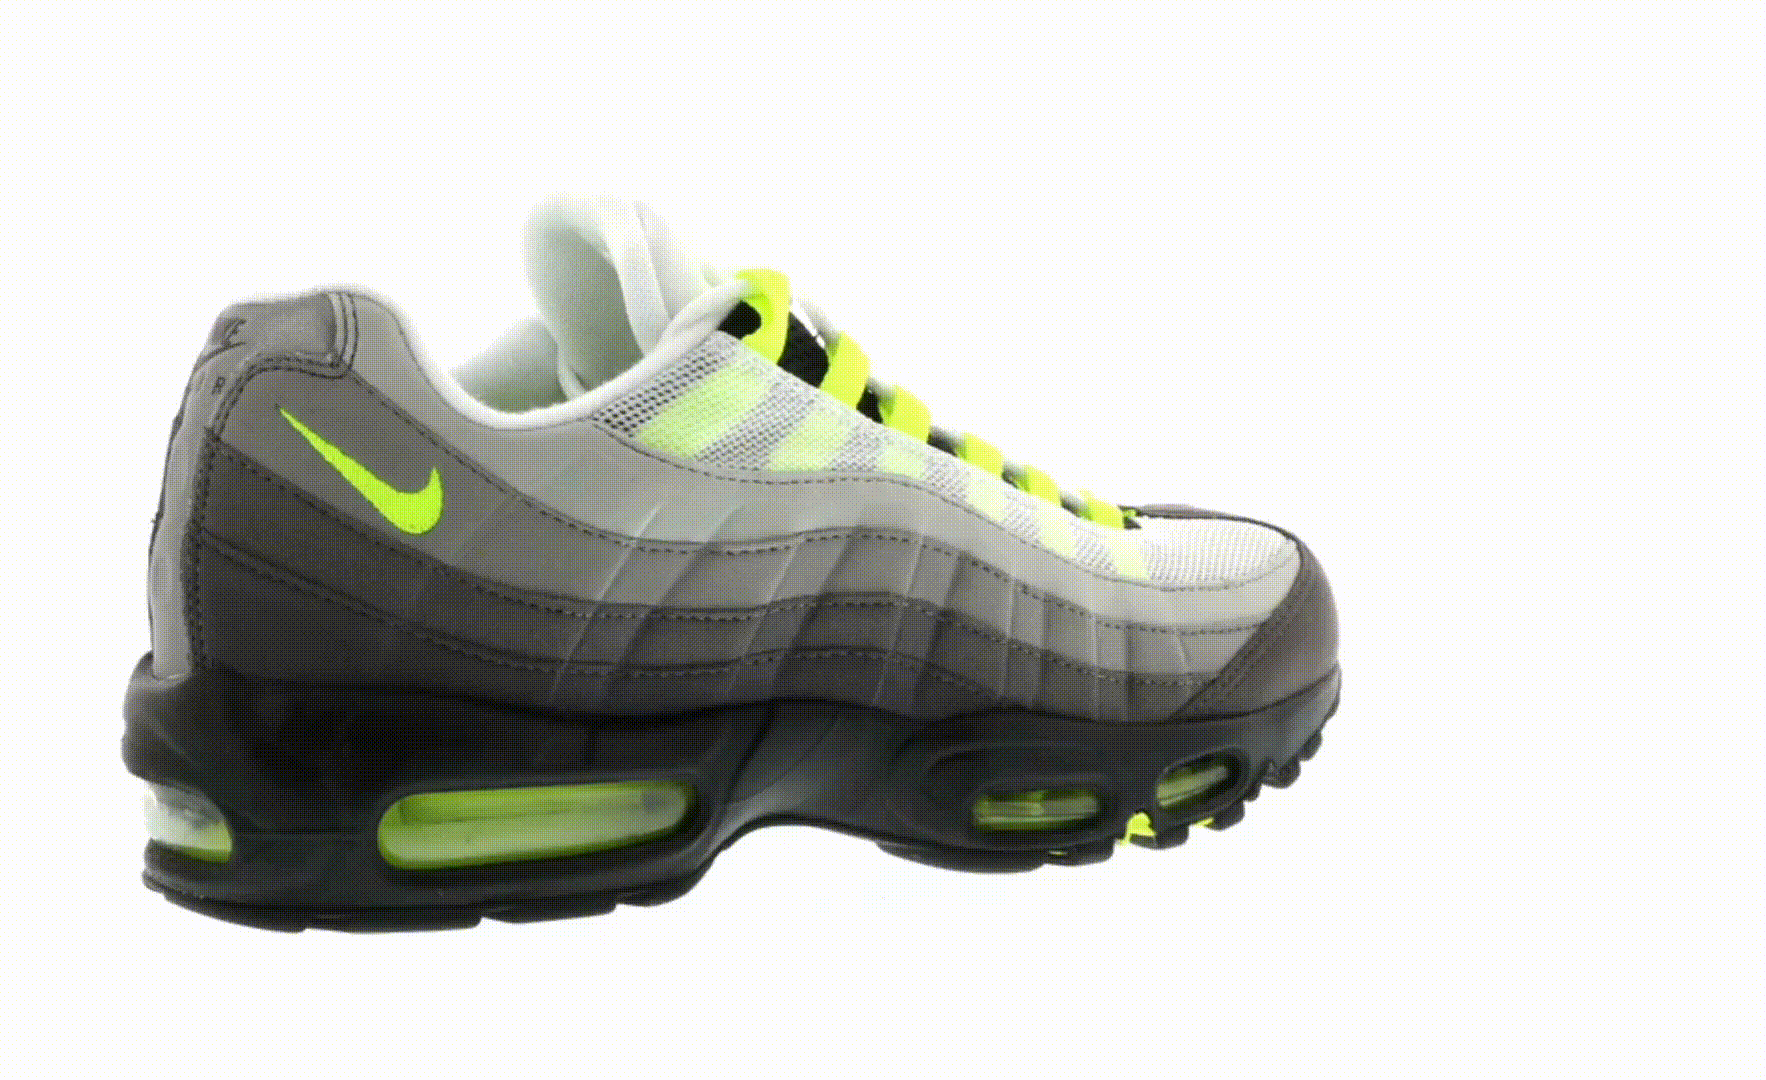 The legendary Nike Air Max 95 'Neon' is coming this fall